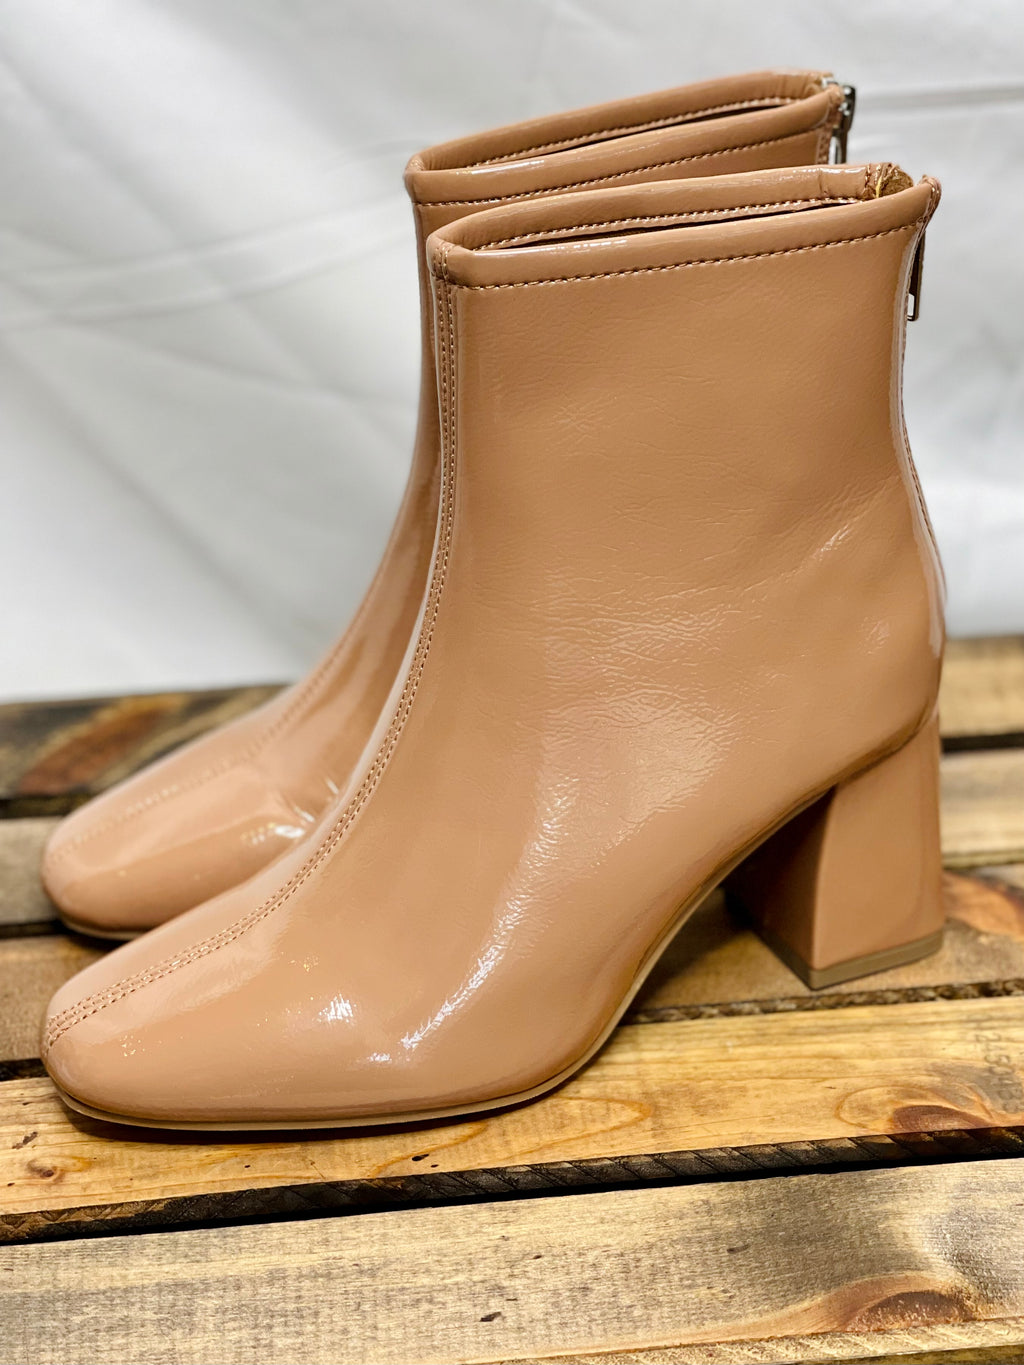 -Camel Color  -Back Zipper Closure   -3" Heel   -Padded Insole   *Runs True To Size*